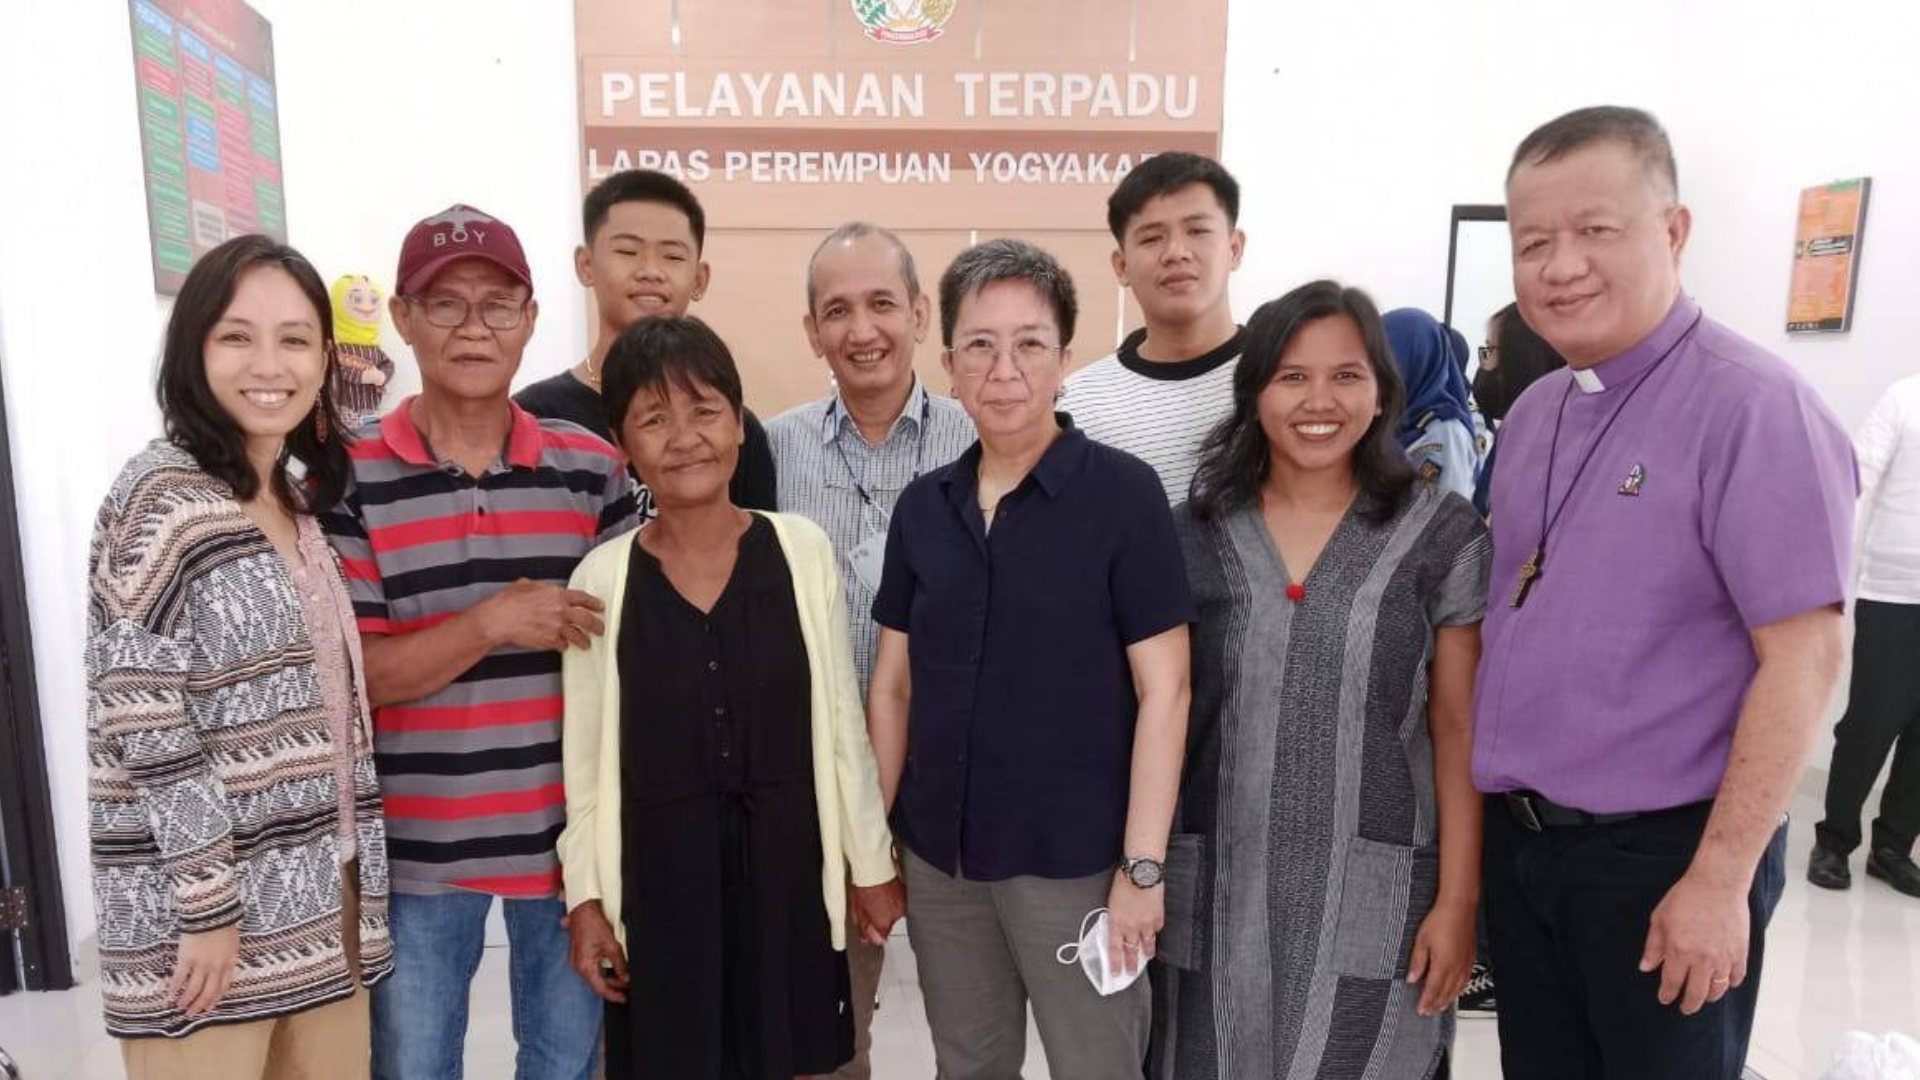 Mary Veloso with her family, lawyers and support group in Yogyakarta, Indonesia